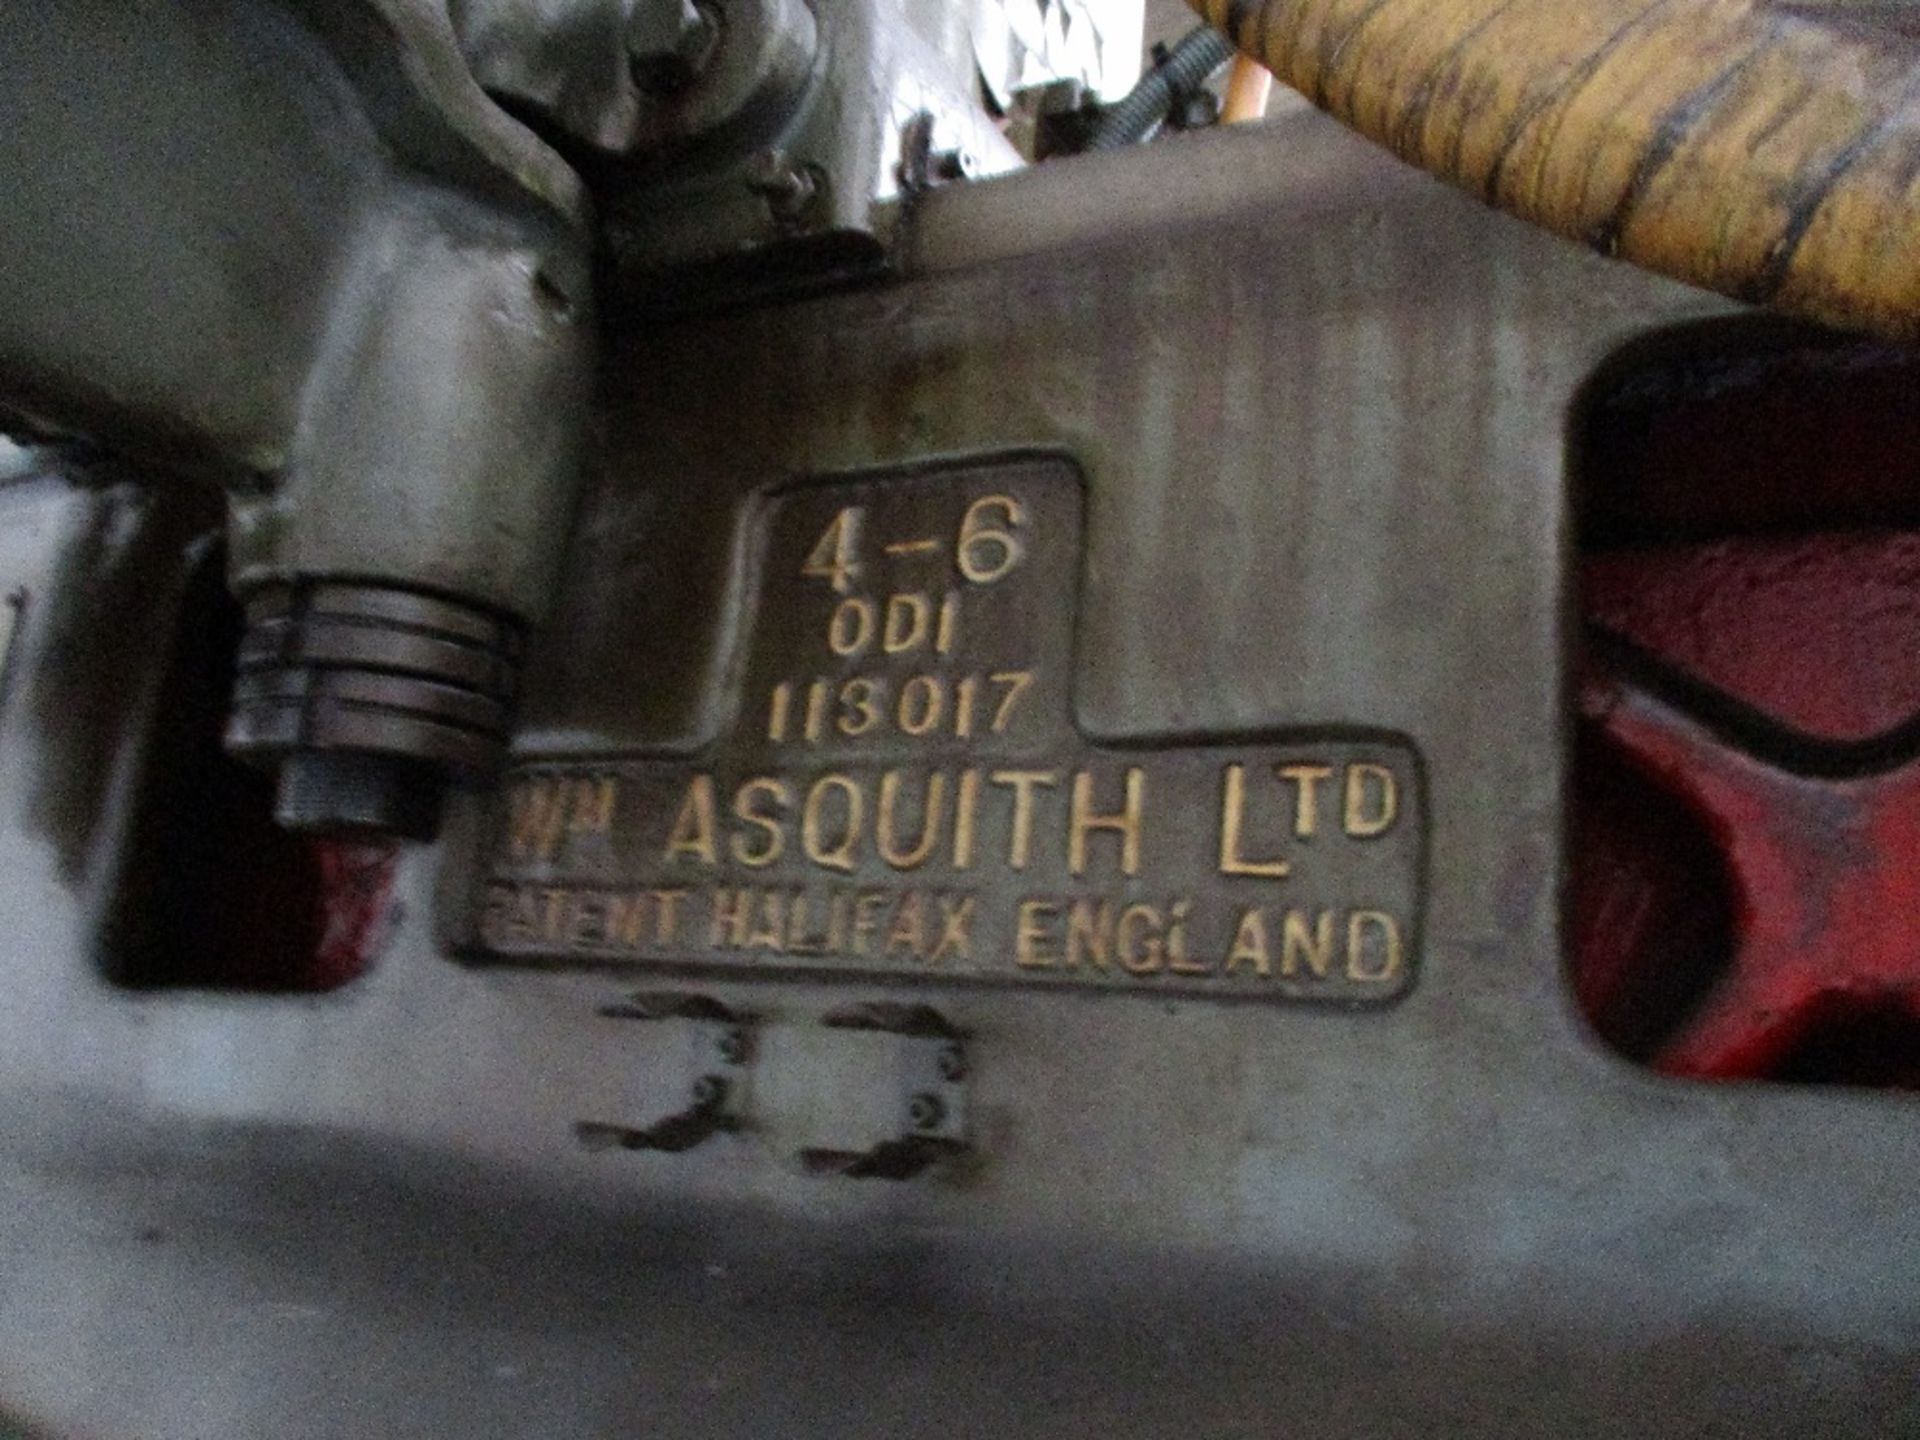 ASQUITH LARGE SIZED RADIAL DRILL, EX COMPANY LIQUIDATION - Image 4 of 4